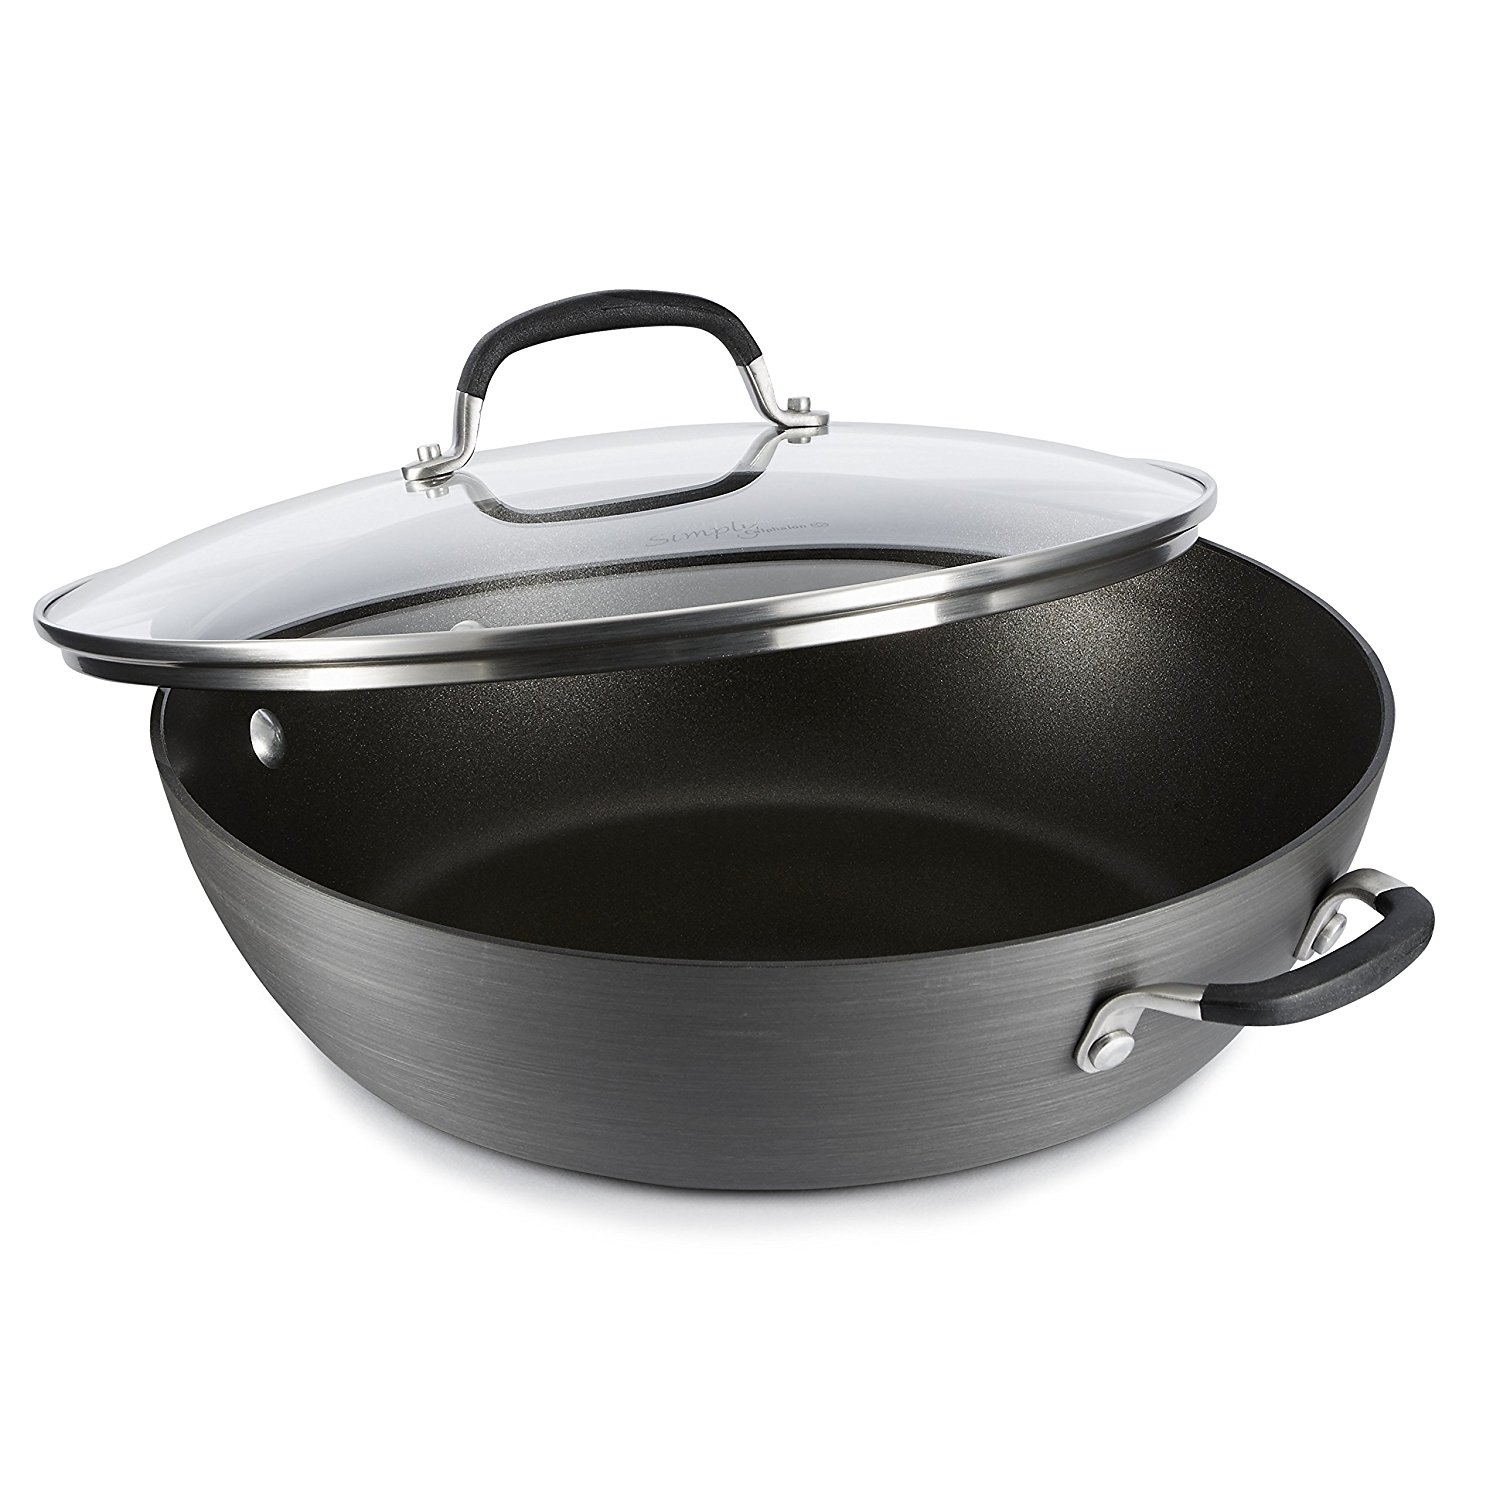 simply-calphalon-nonstick-12-inch-all-purpose-pan-only-24-07